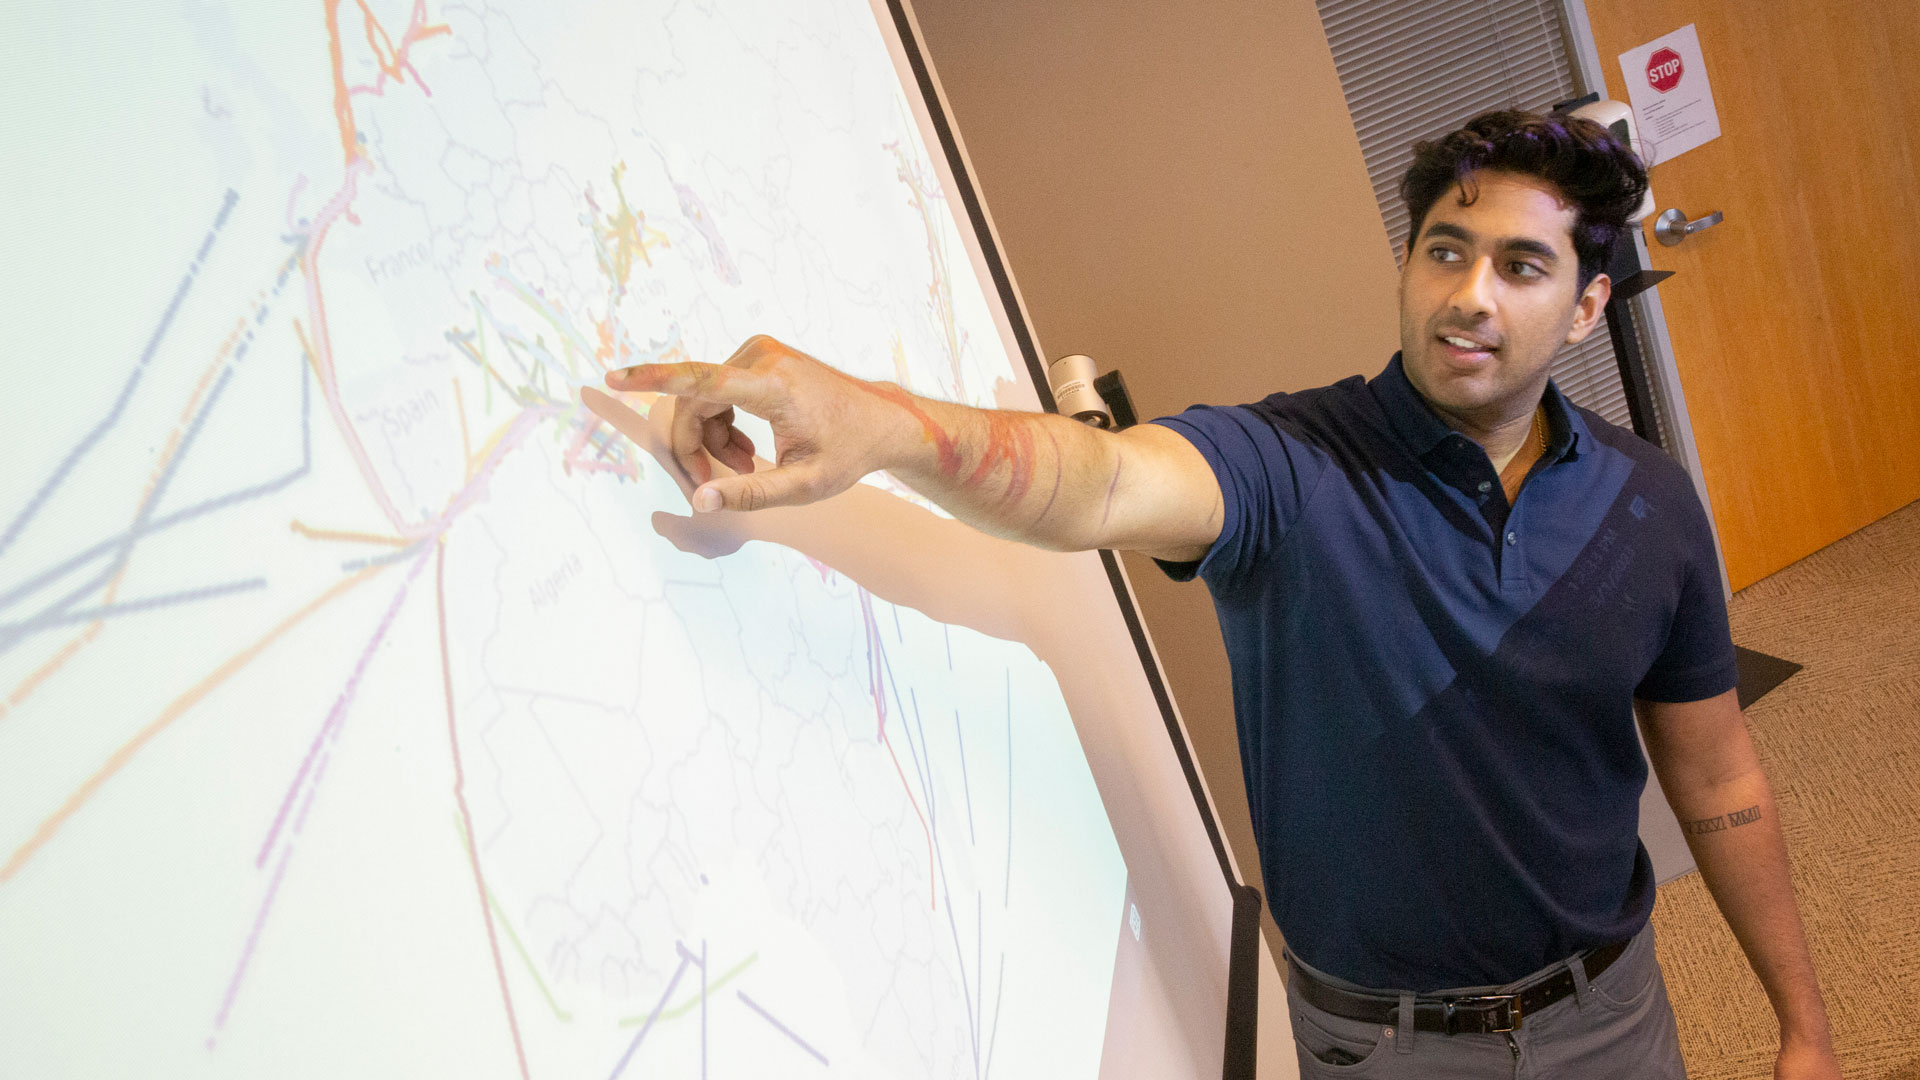 ASU computer science student Rohan Nair points at a projection screen displaying shipping routes.